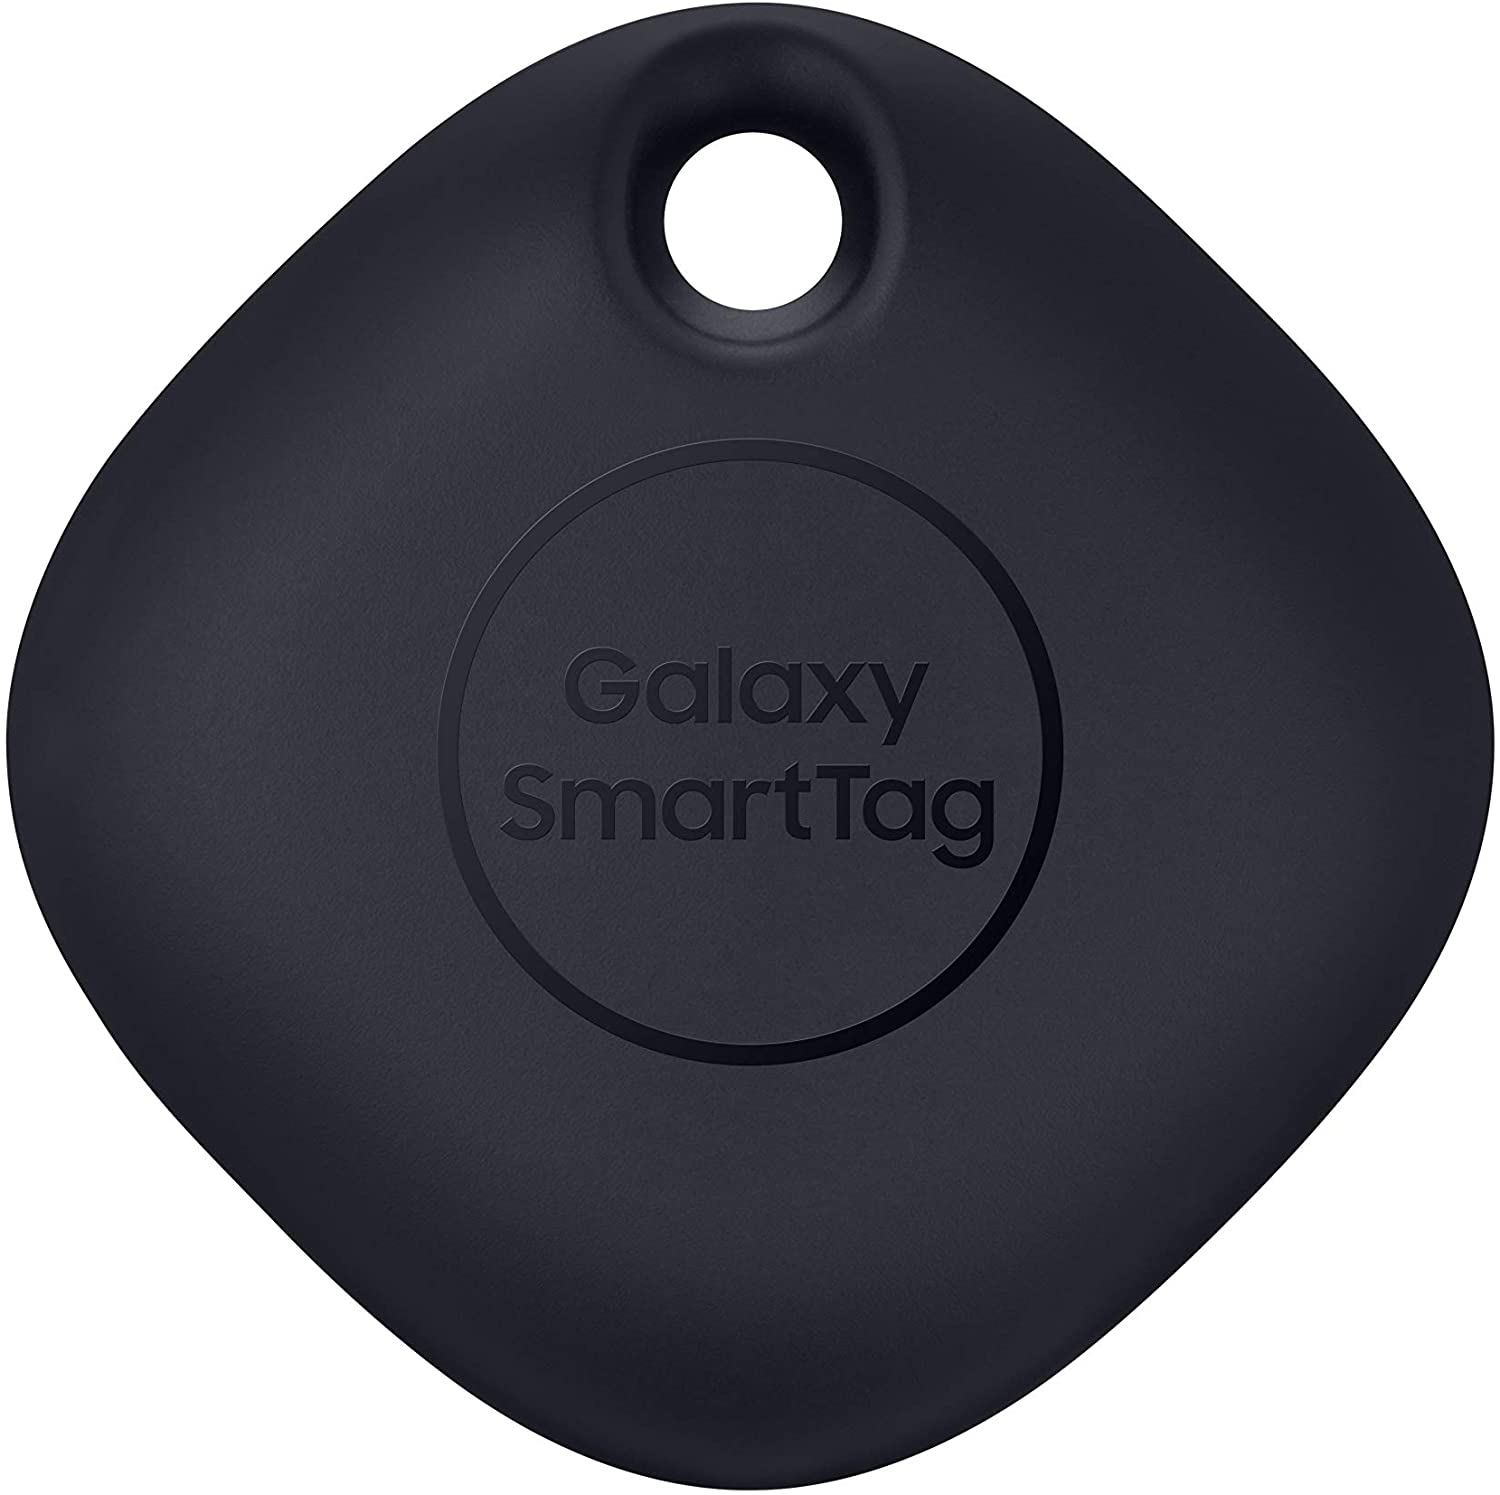 Amazon.com: Samsung Galaxy SmartTag Bluetooth Tracker & Item Locator for Keys, Wallets, Luggage, Pets and More (1 Pack), Black (US Version) : Electronics $17.99